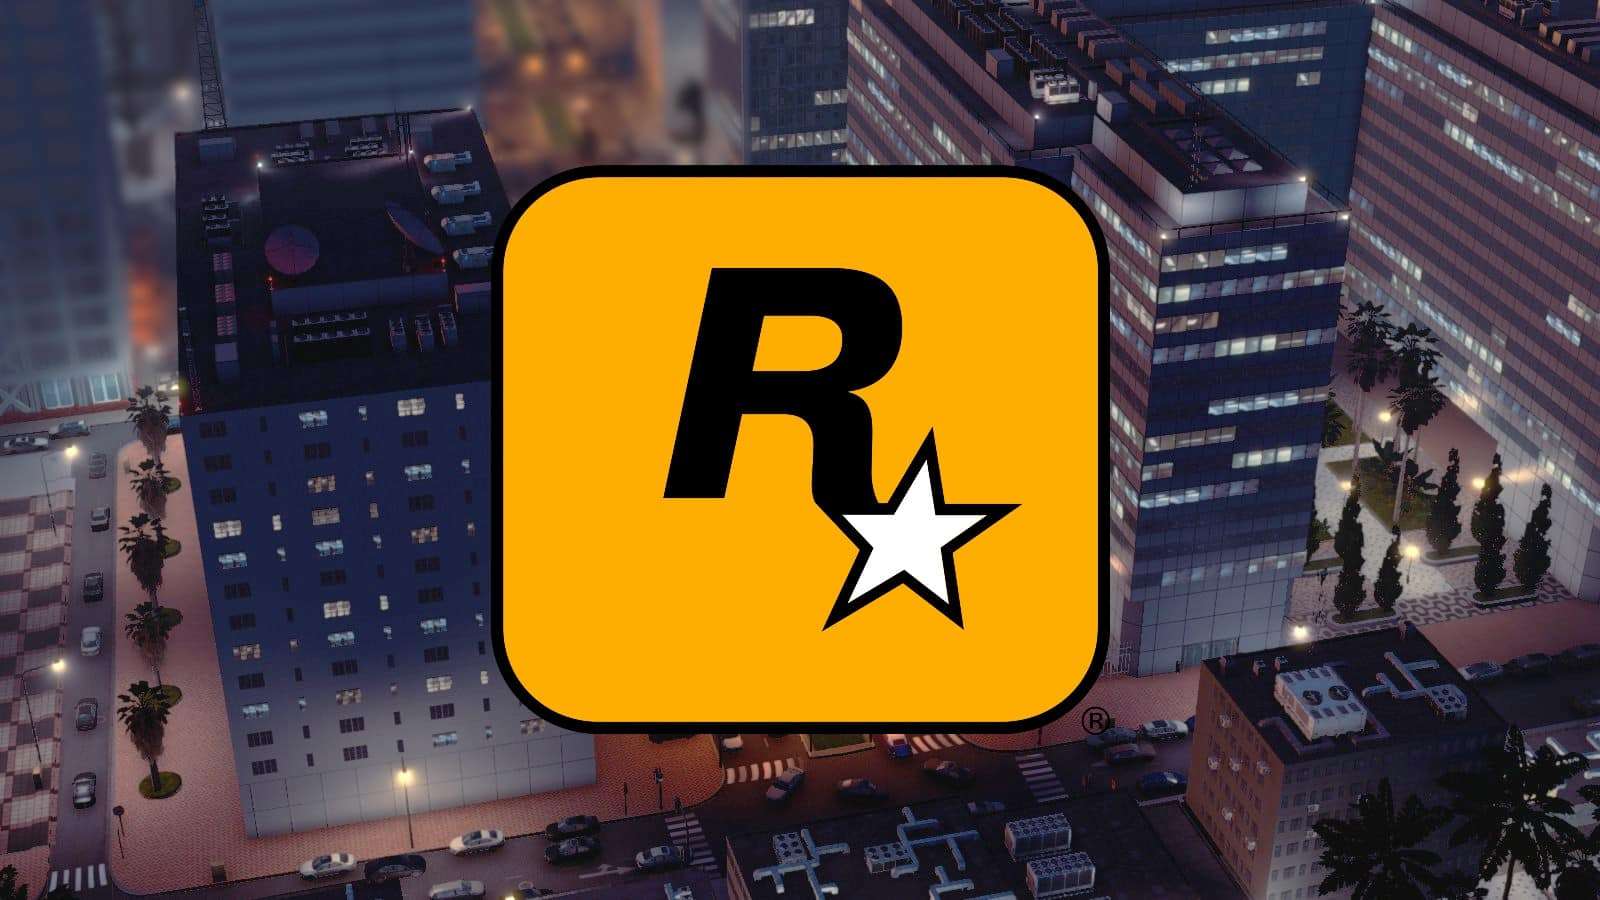 Rockstar logo superimposed over an aerial view of Vice City